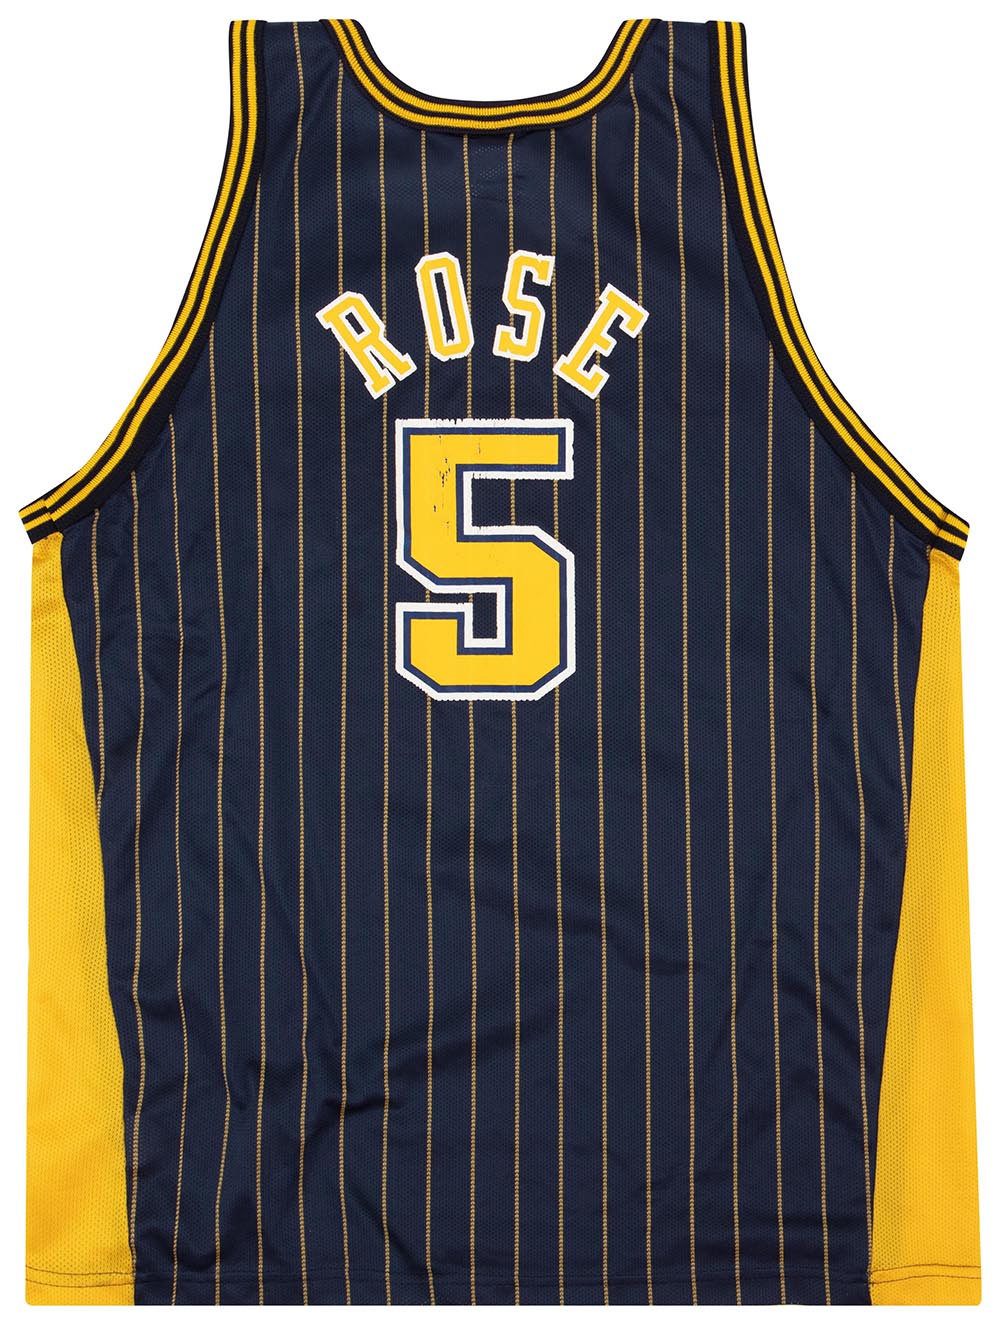 1997-02 INDIANA PACERS ROSE #5 CHAMPION JERSEY (AWAY) L